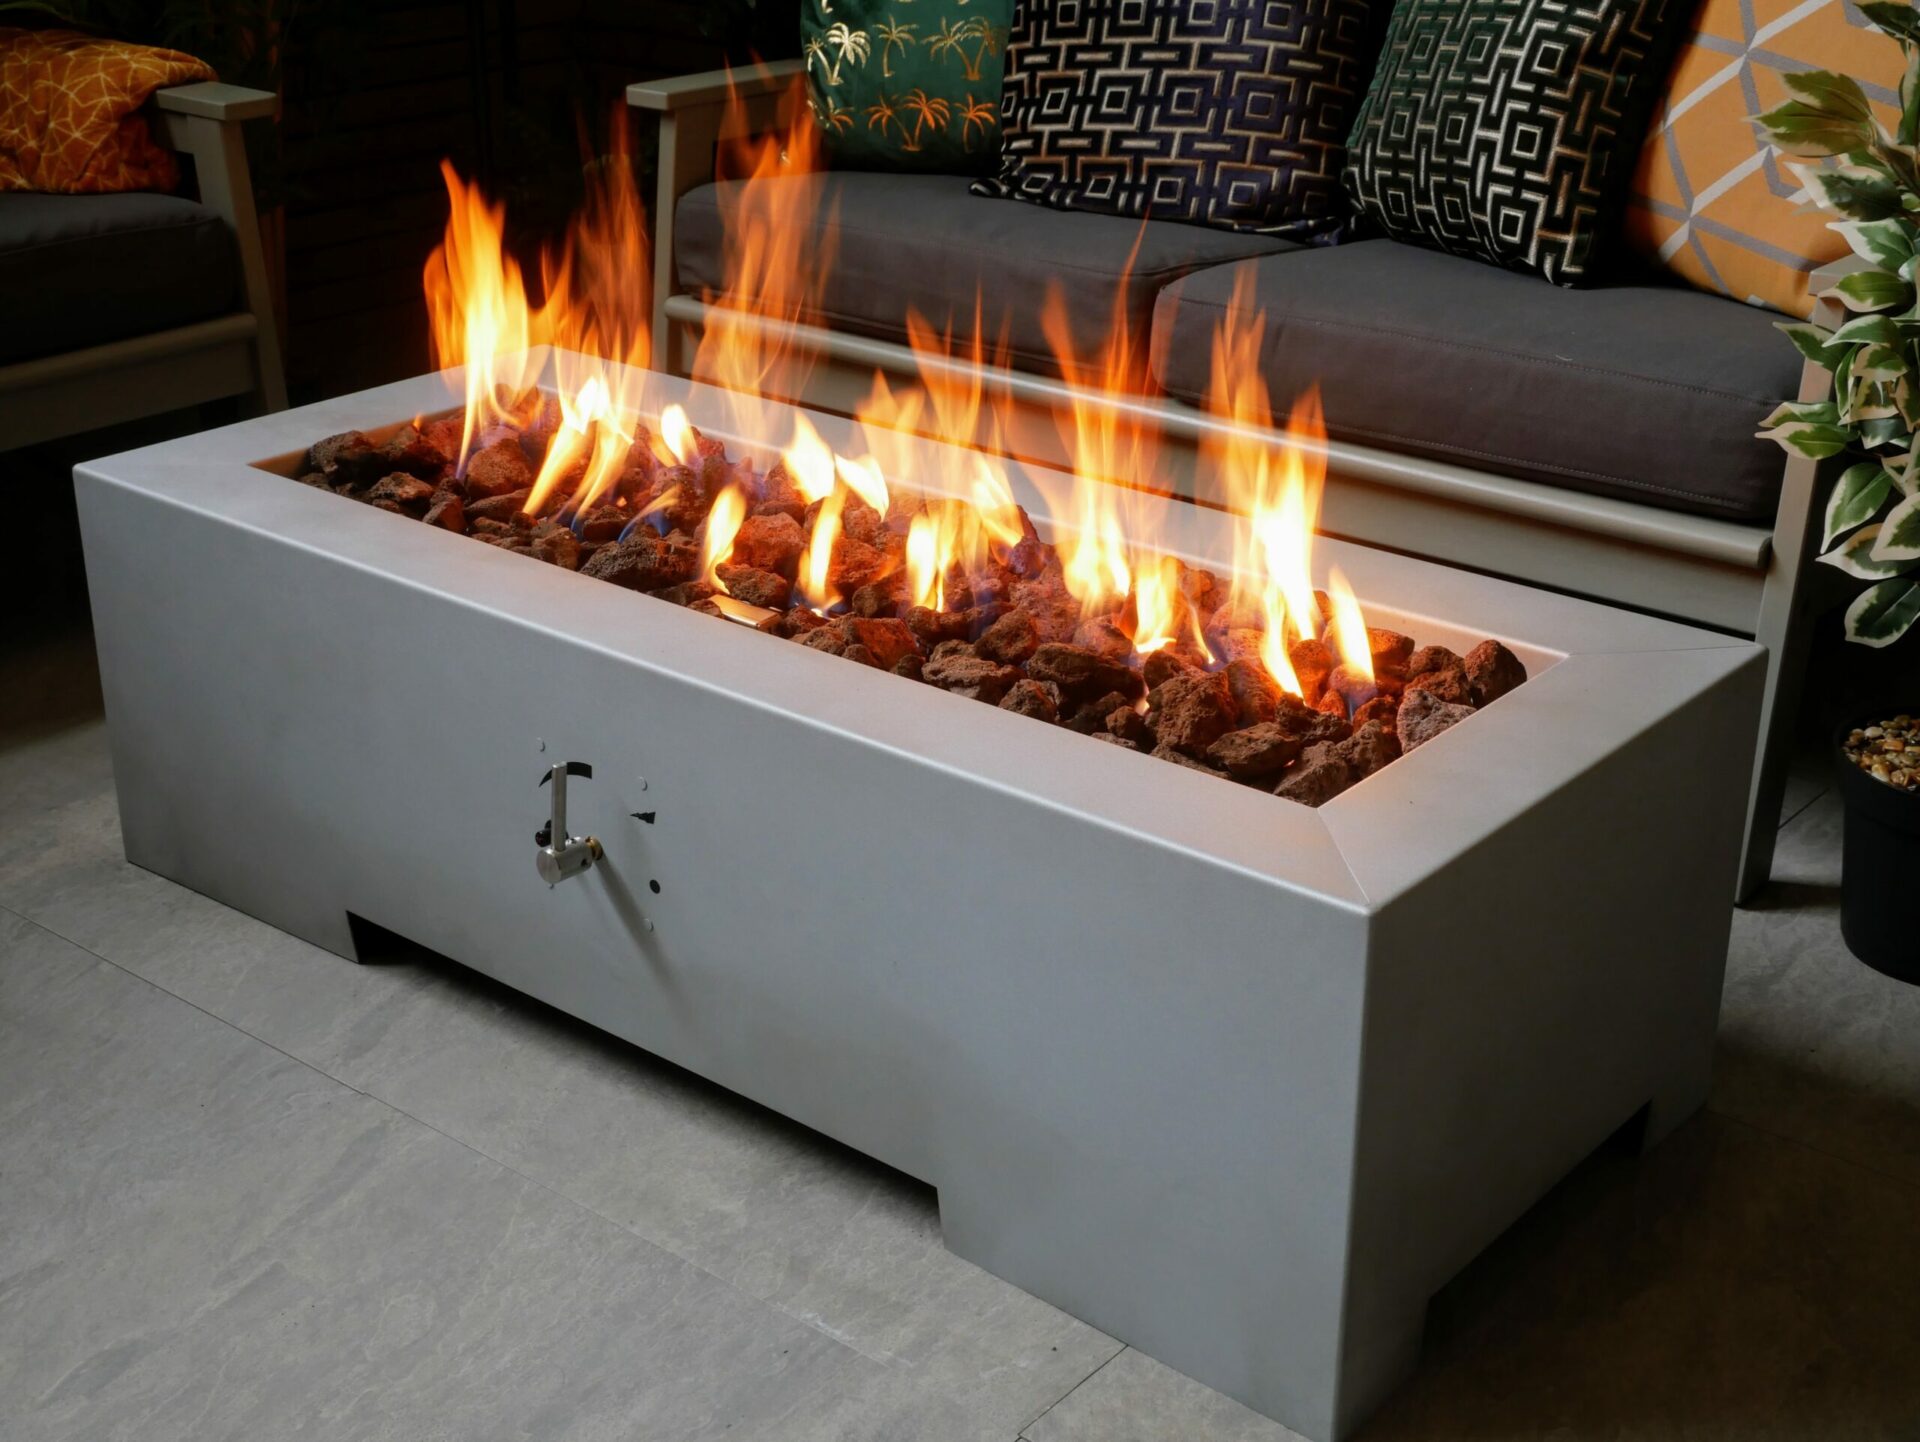 A long rectangular fire pit with flames, set against an outdoor seating area with decorative cushions.